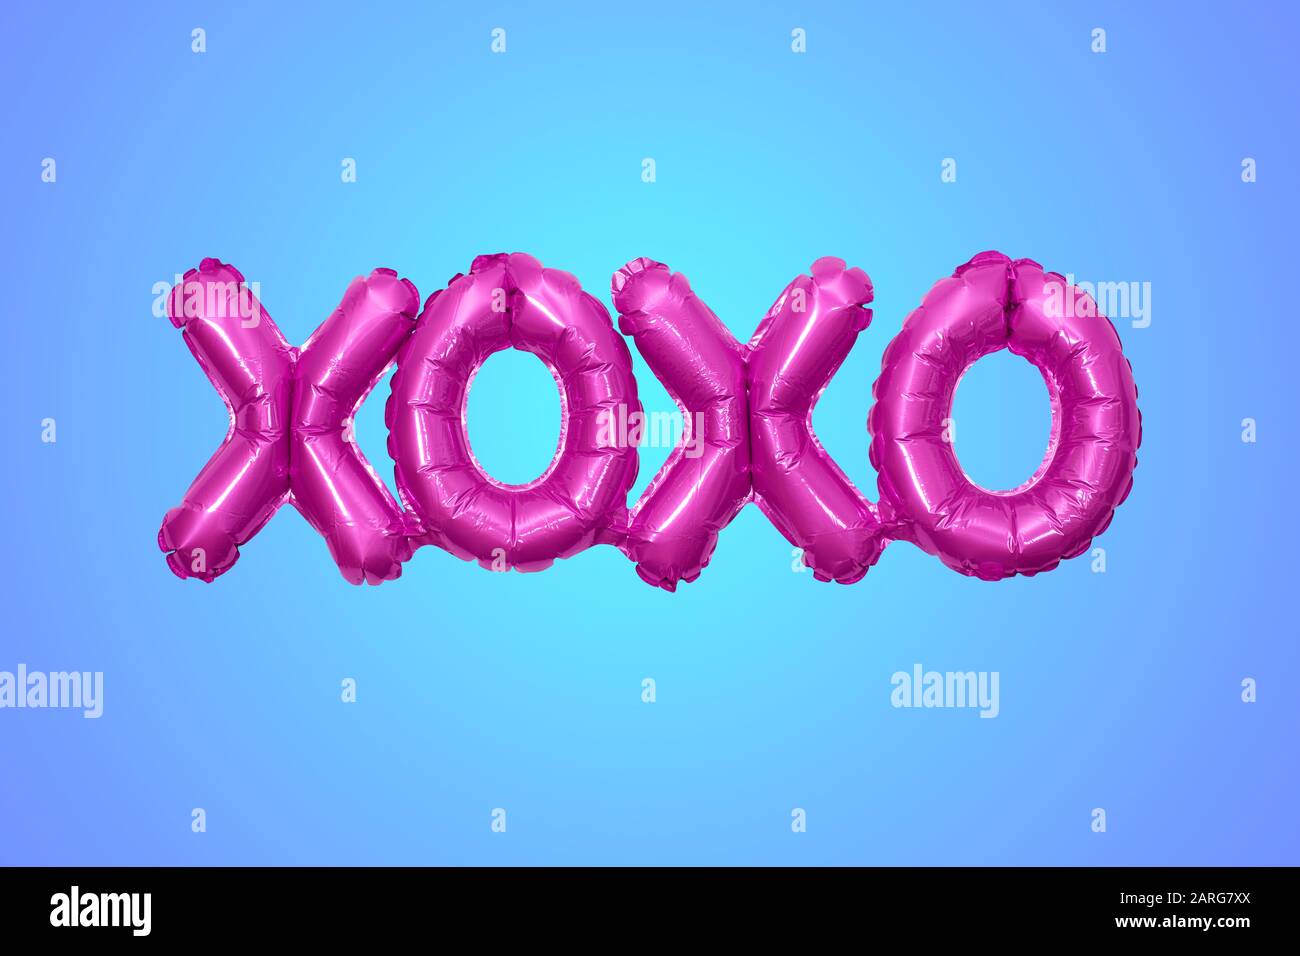 Inflated party balloon forming the letters XOXO meaning hugs and kisses Stock Photo